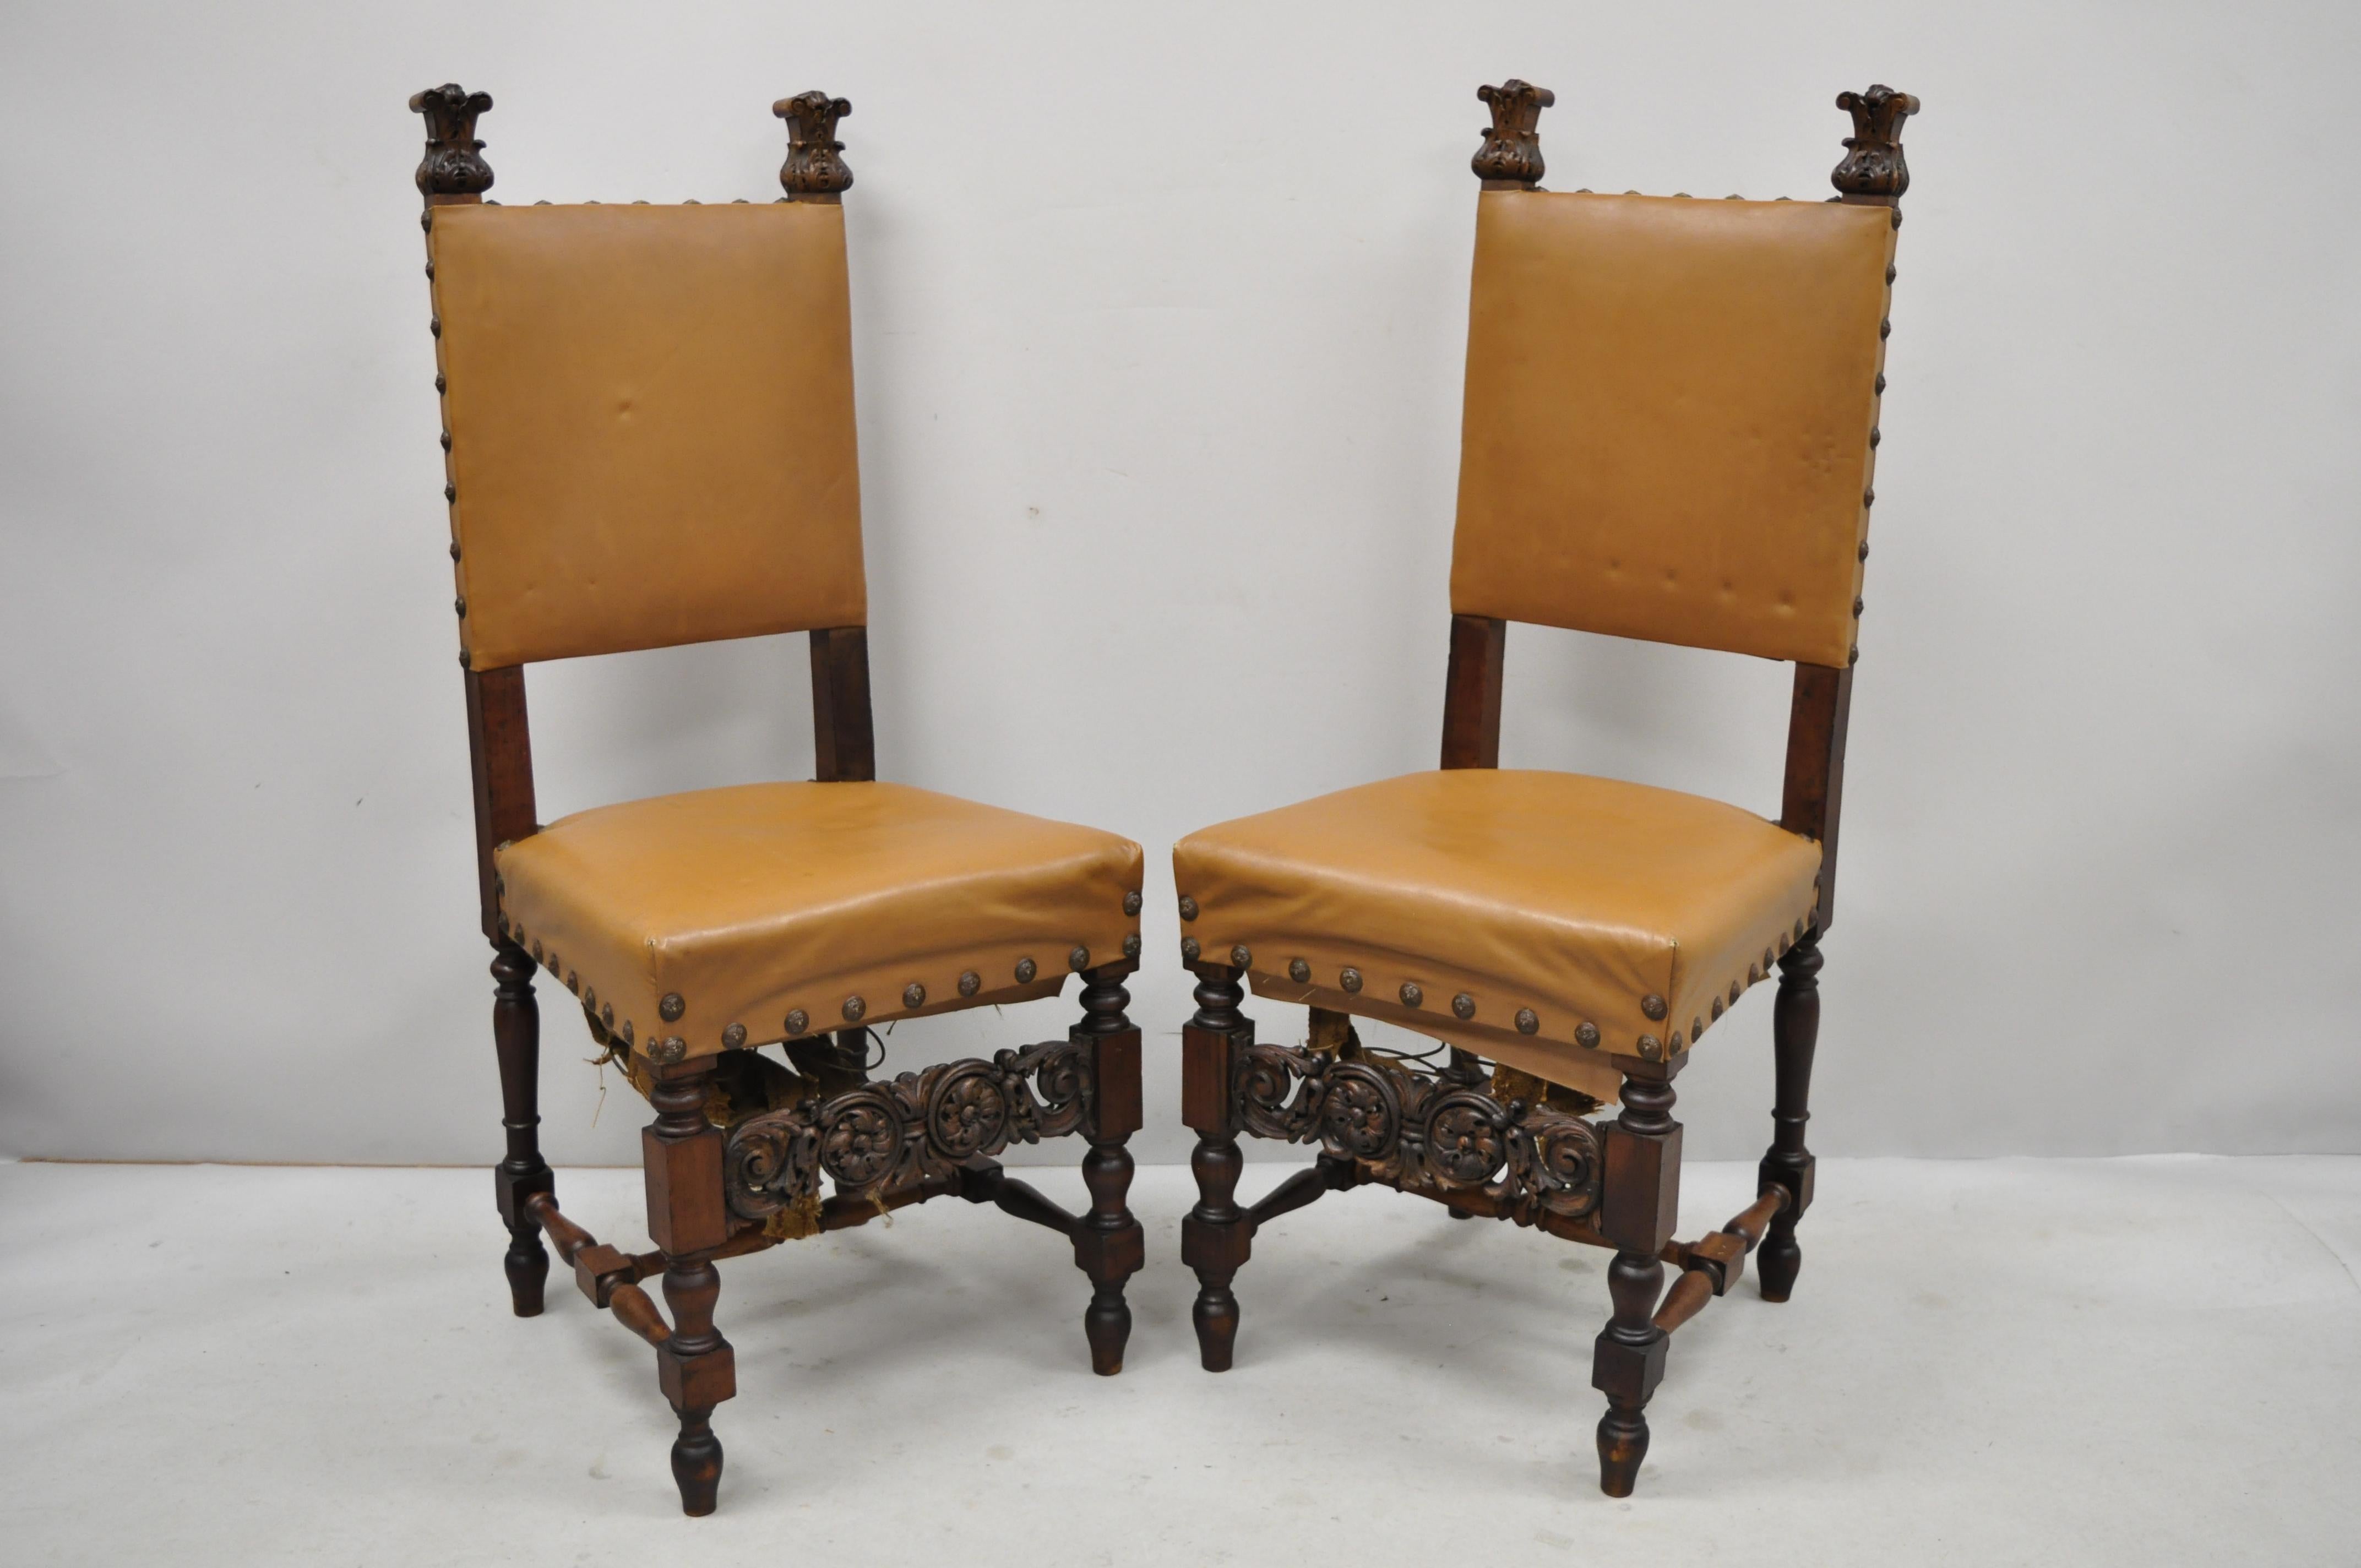 Pair of Antique Italian Renaissance Carved Walnut High Back Side Chairs For Sale 5